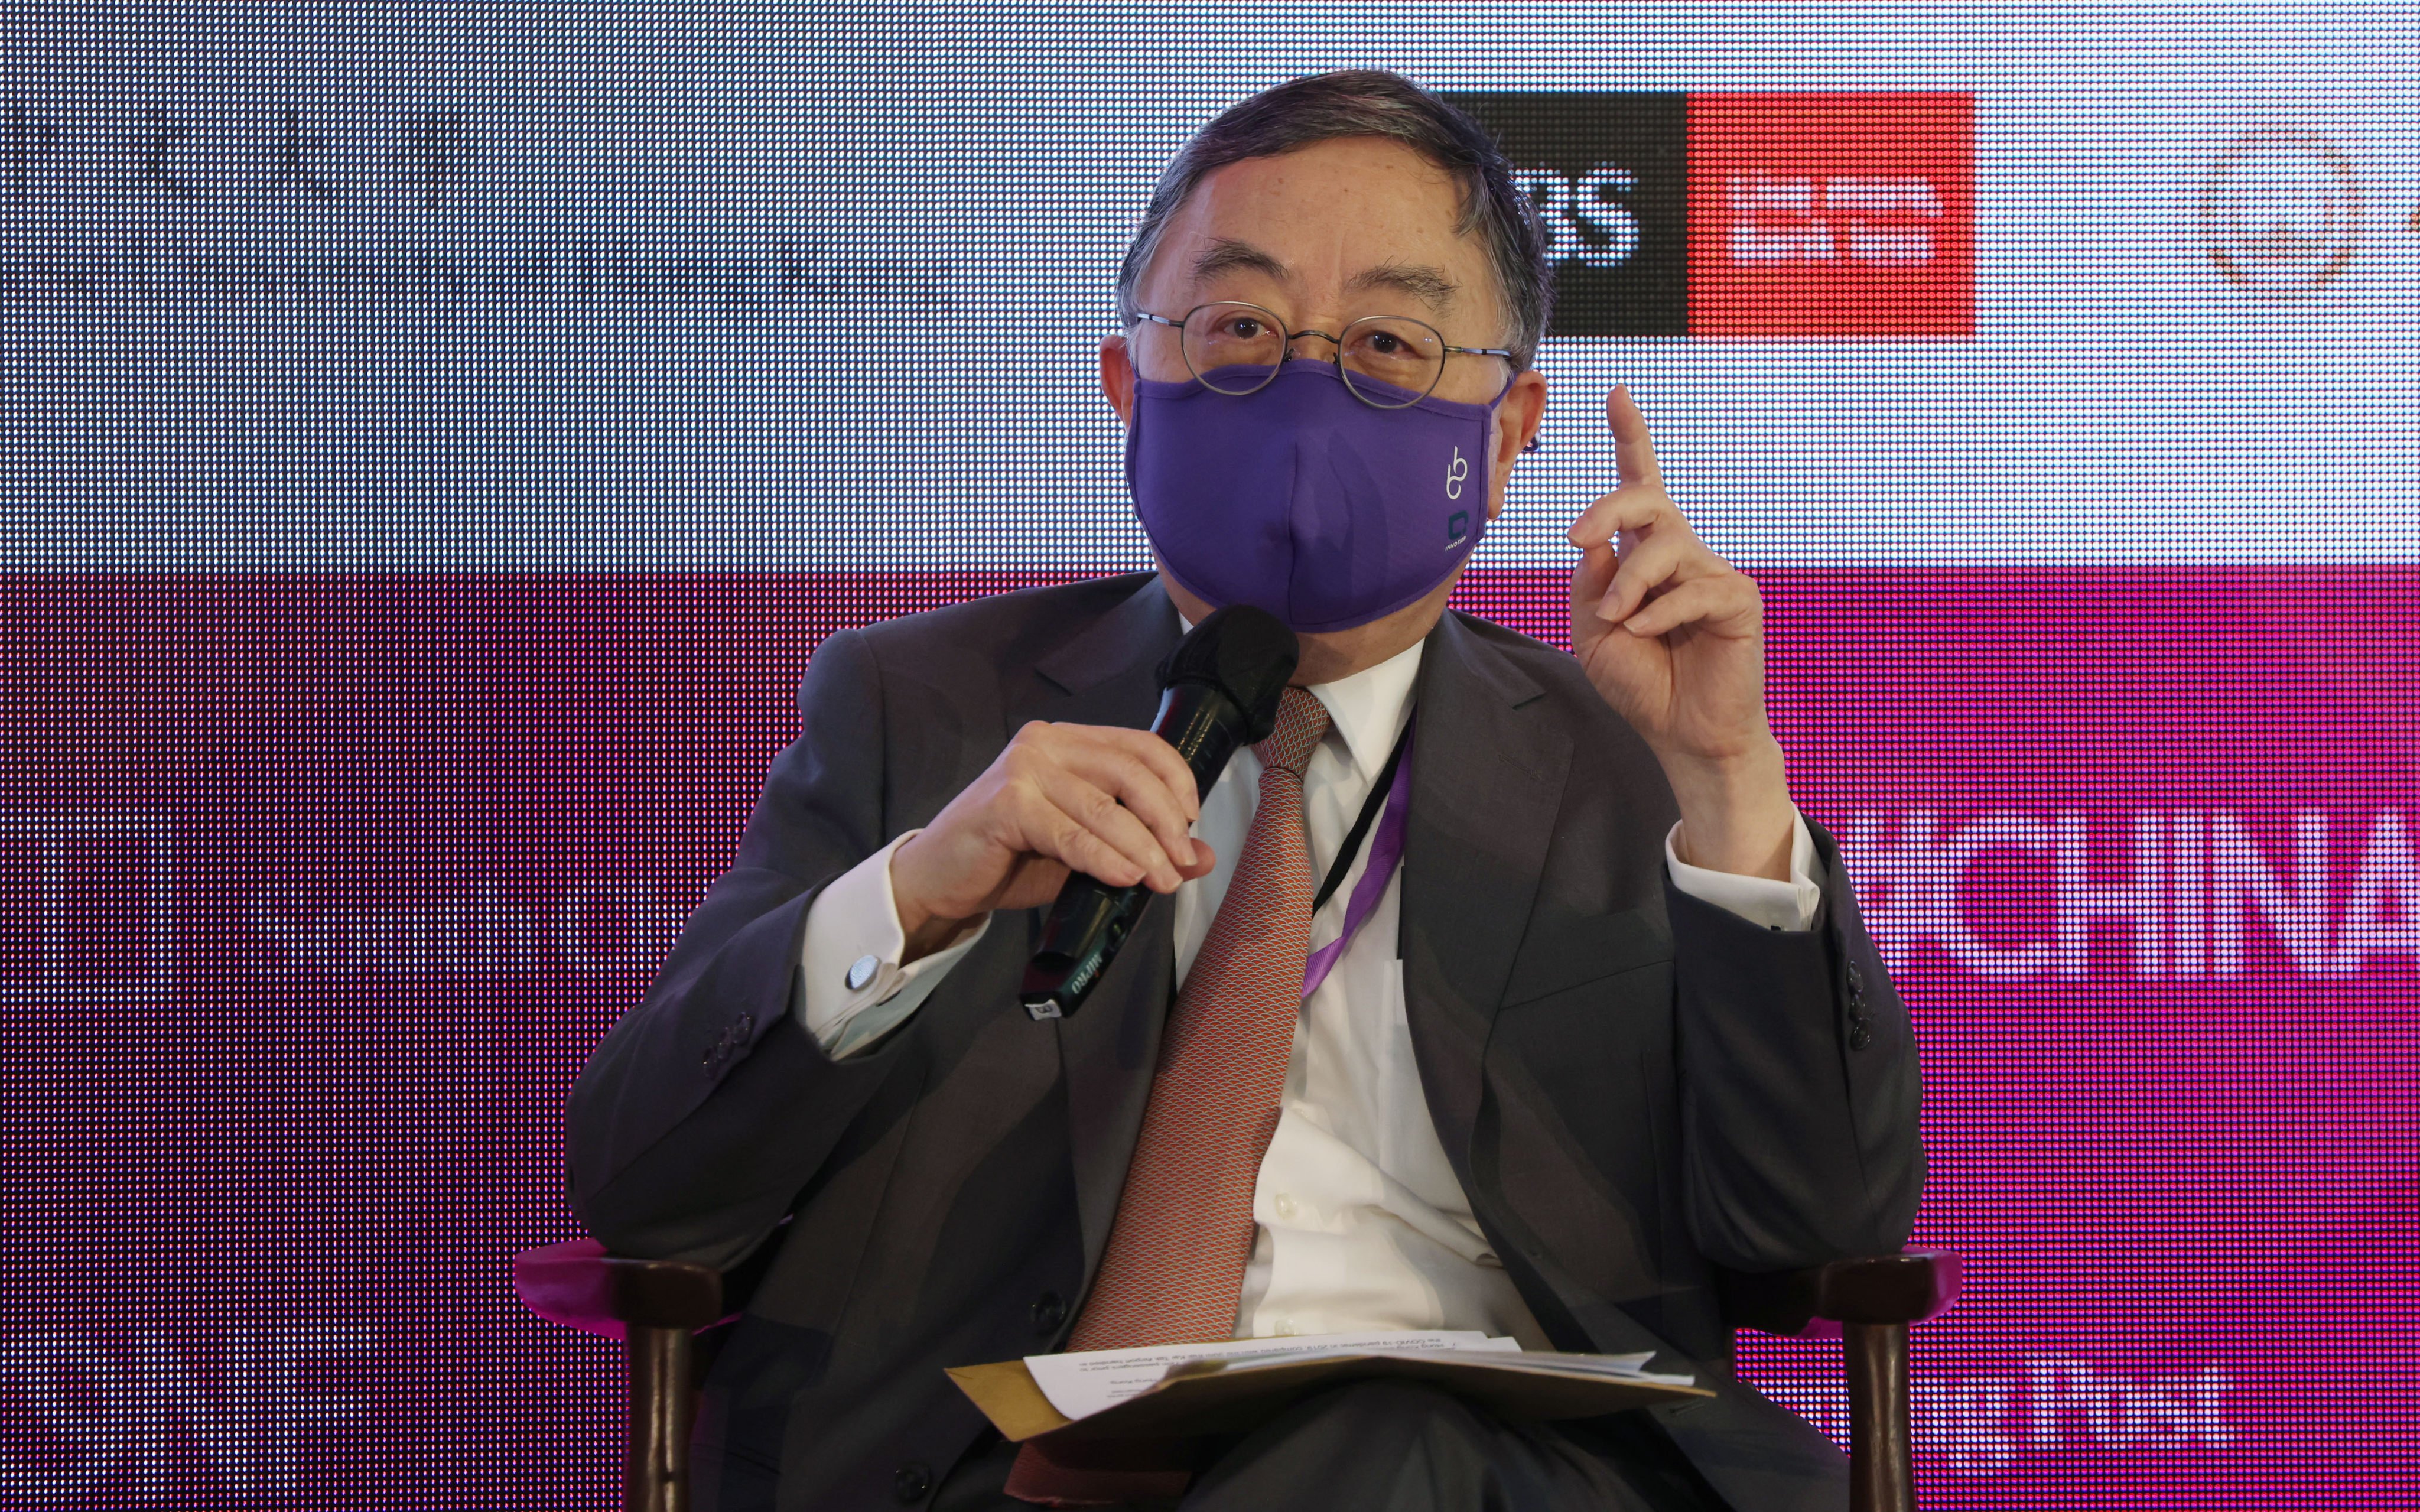 Hang Lung Group chairman Ronnie Chan speaks at a conference held by the South China Morning Post. Photo: Nora Tam